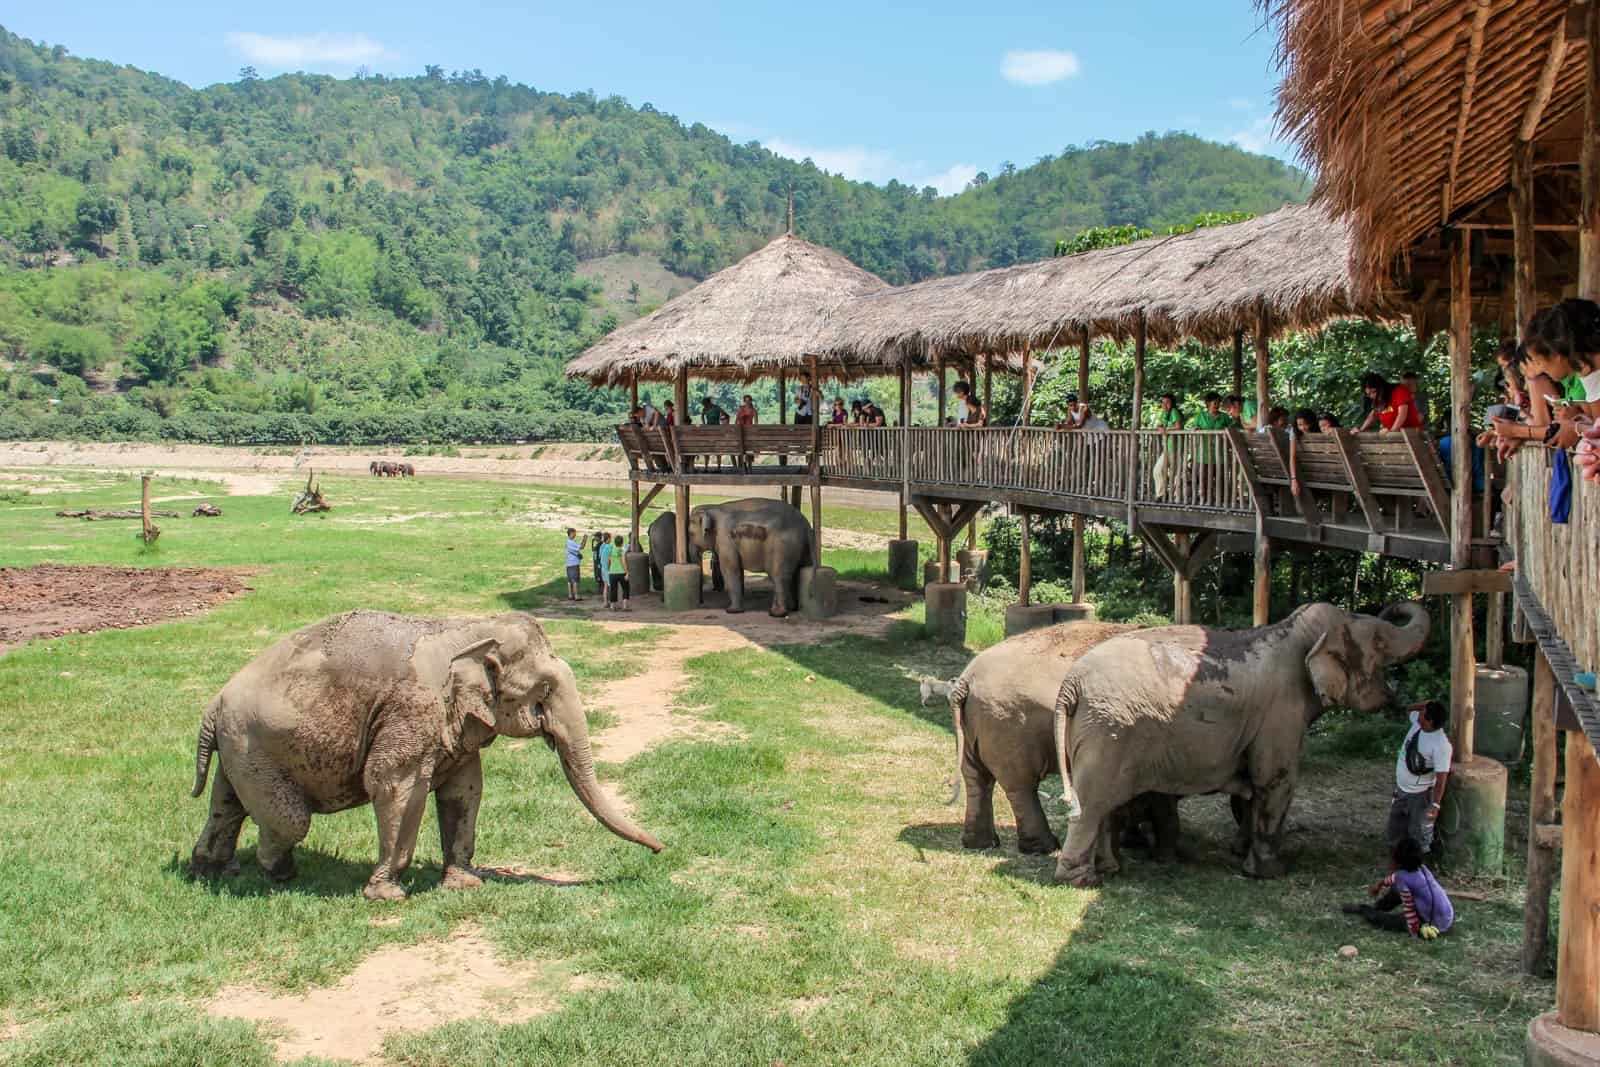 From a raised platform, tourists interact responsibly with elephants without riding them at the Elephant Nature Park in Chiang Mai, Thailand.